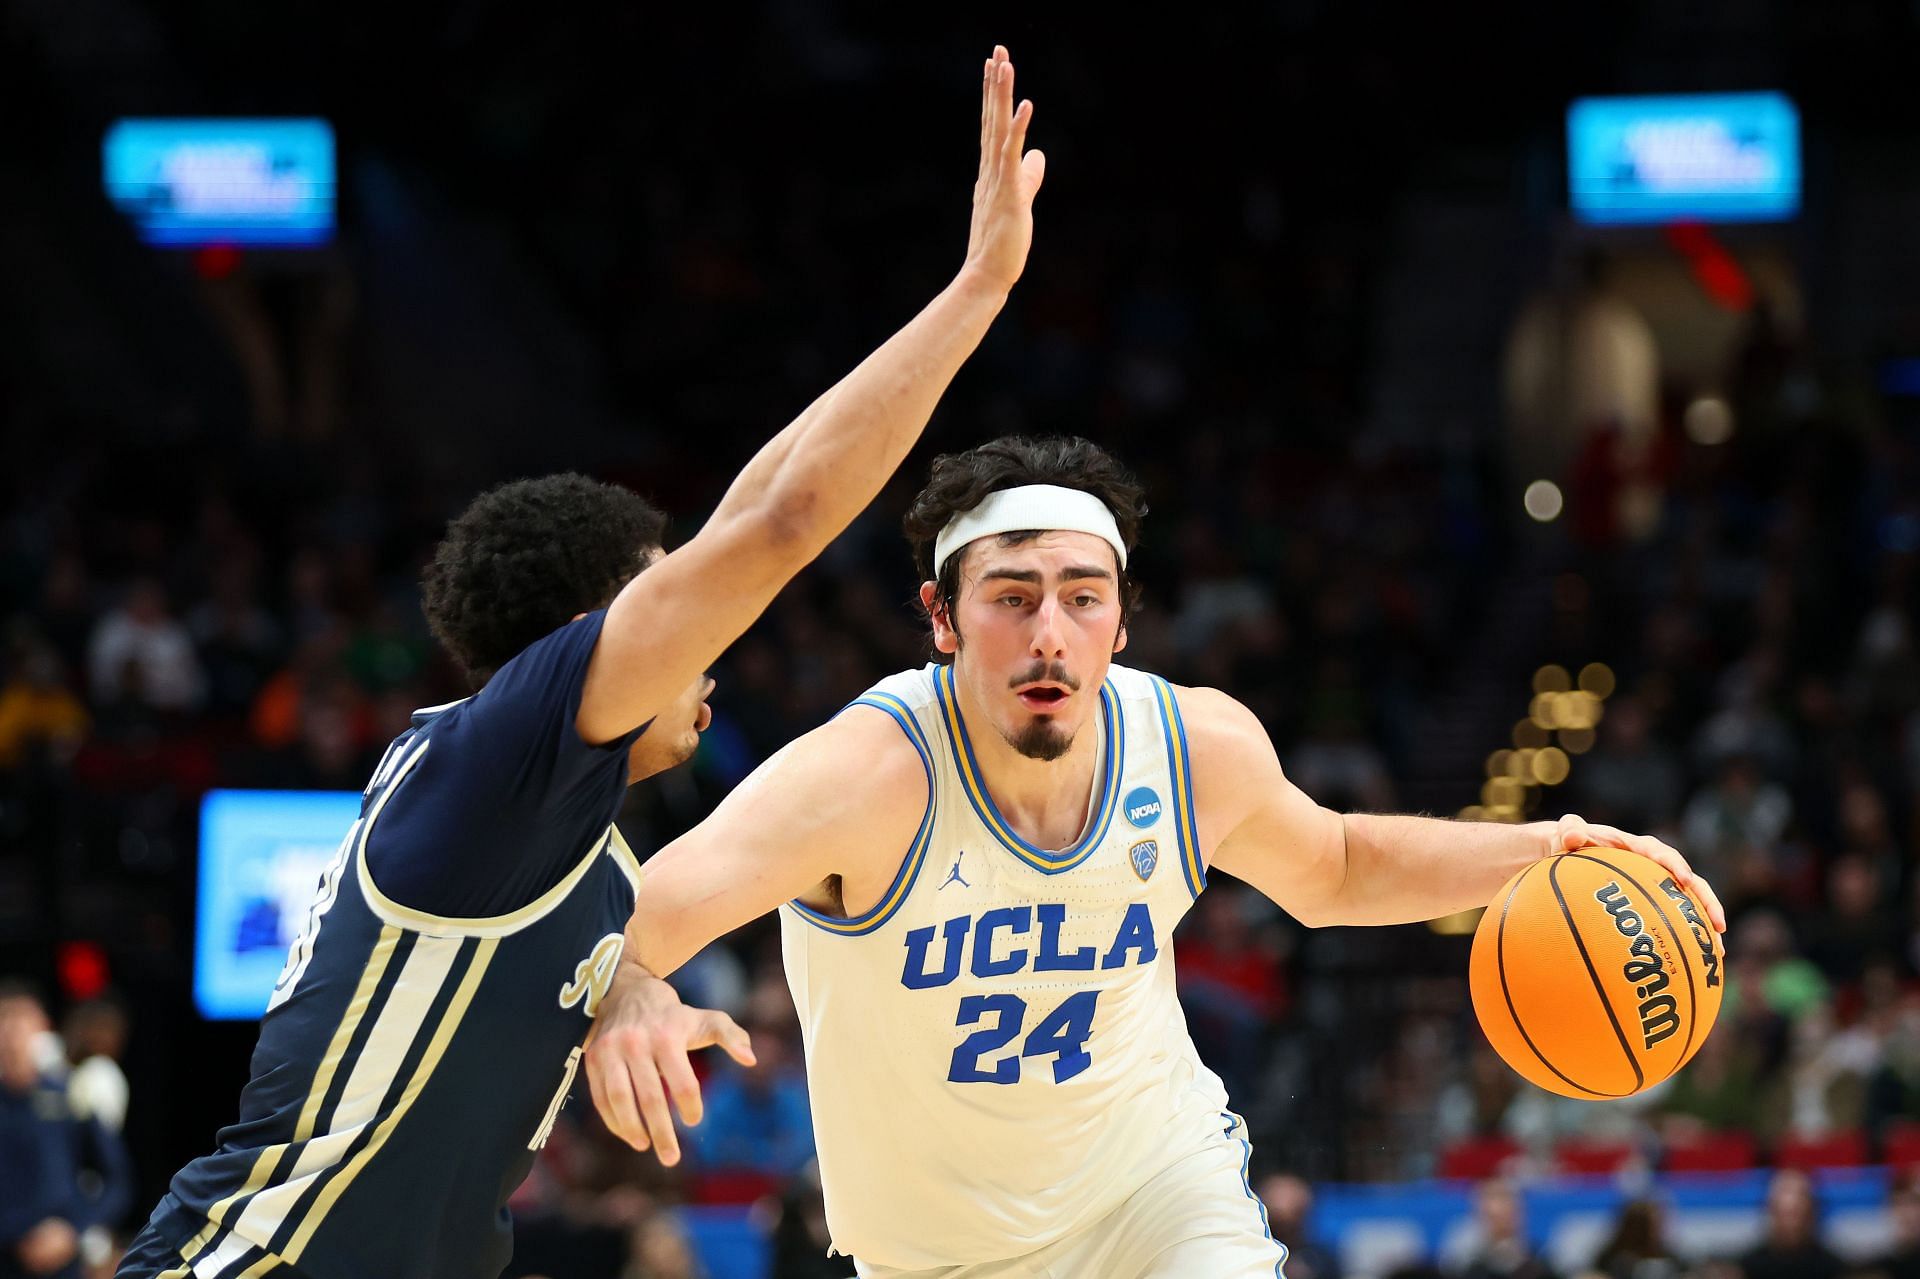 Jaime Jaquez Jr. was a star for the UCLA Bruins but will return for one more season.